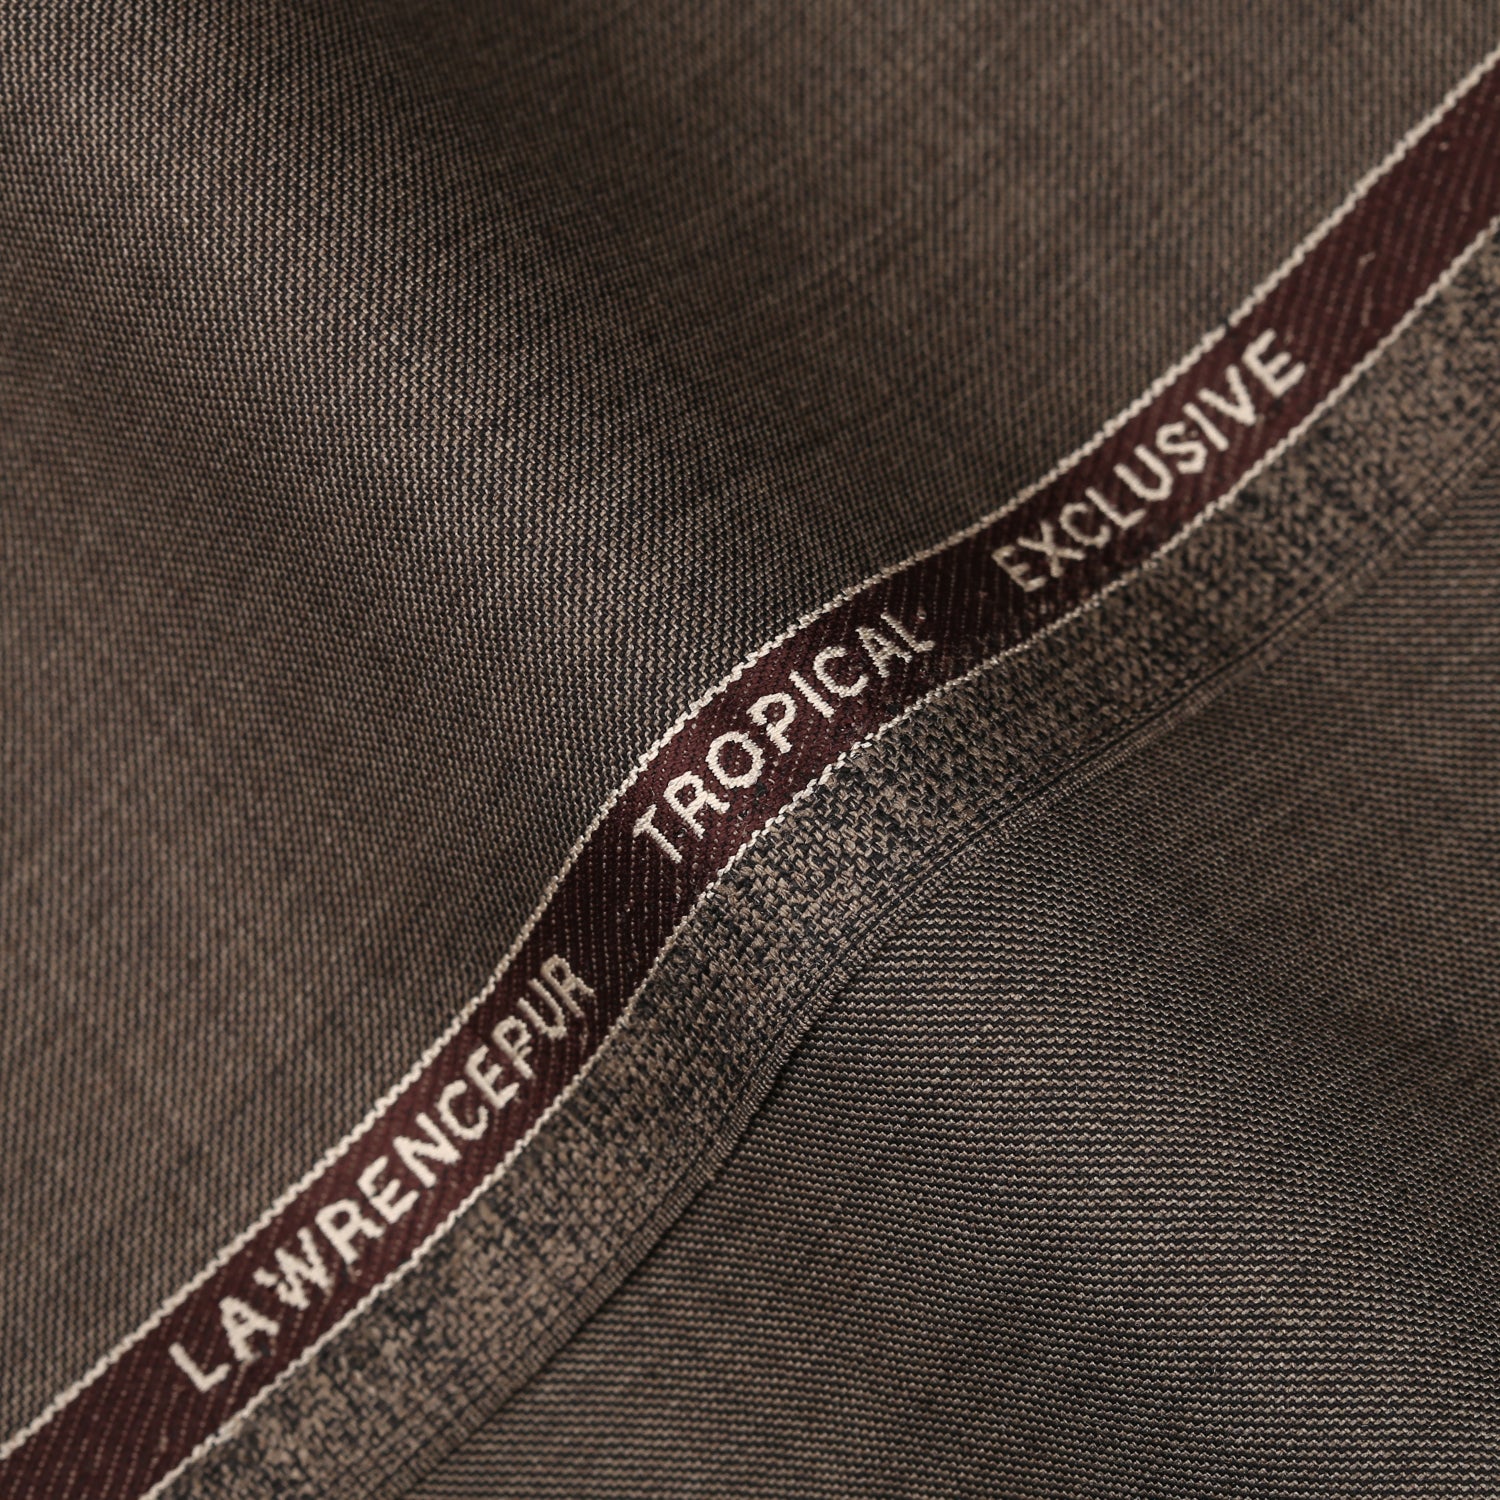 Plain Brown, Wool Blend, Tropical Exclusive Suiting Fabric